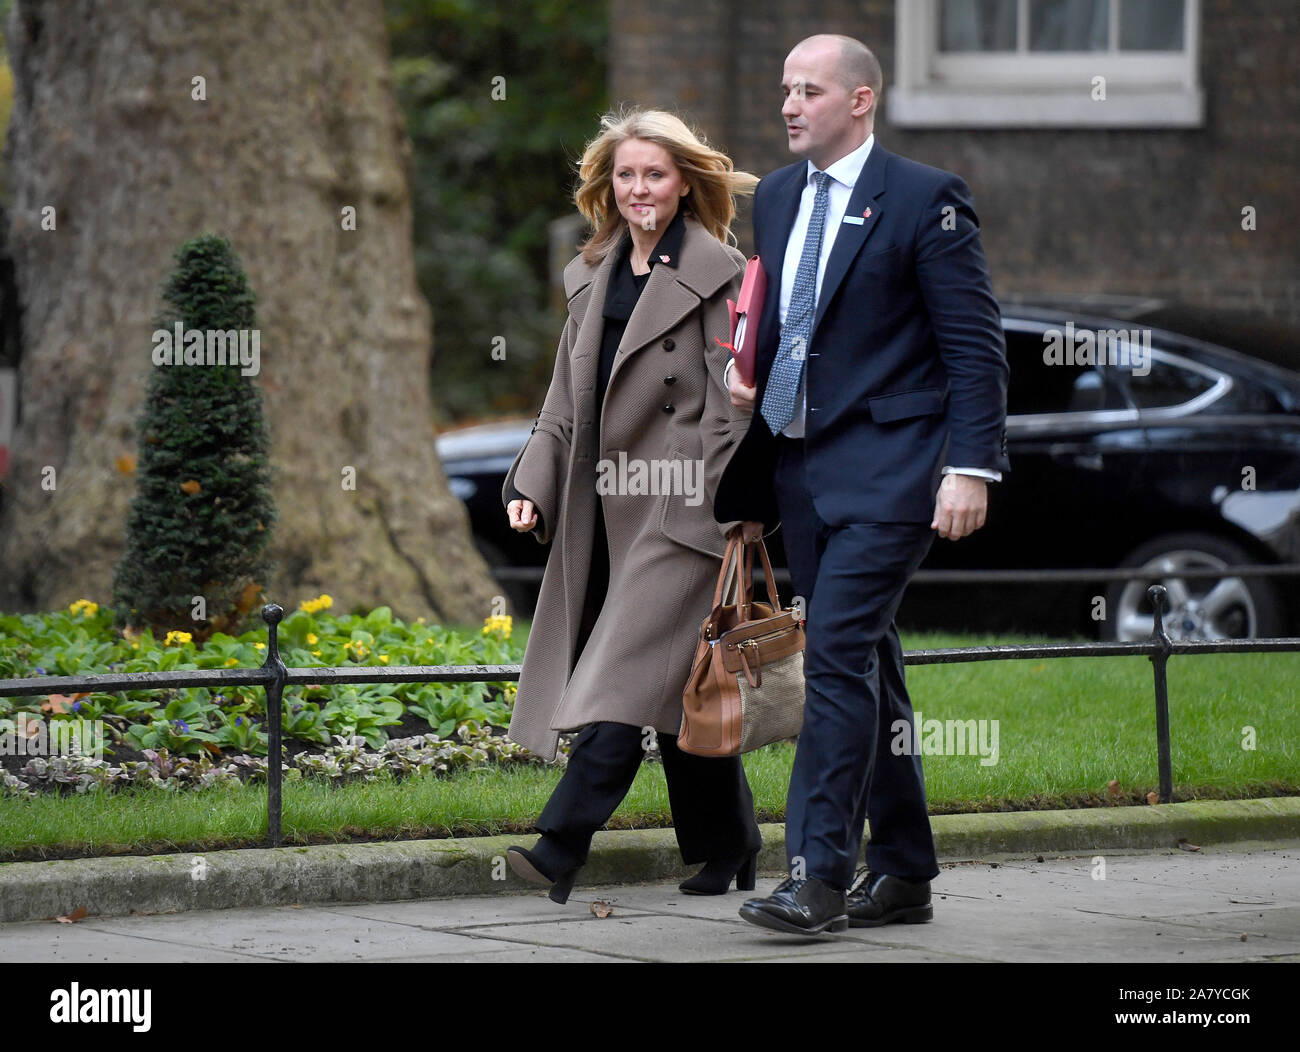 Minister for the Northern Powerhouse and Local Growth Jake Berry and Minister of State for Housing Esther McVey arrive for a Cabinet meeting in Downing Street, London. Stock Photo